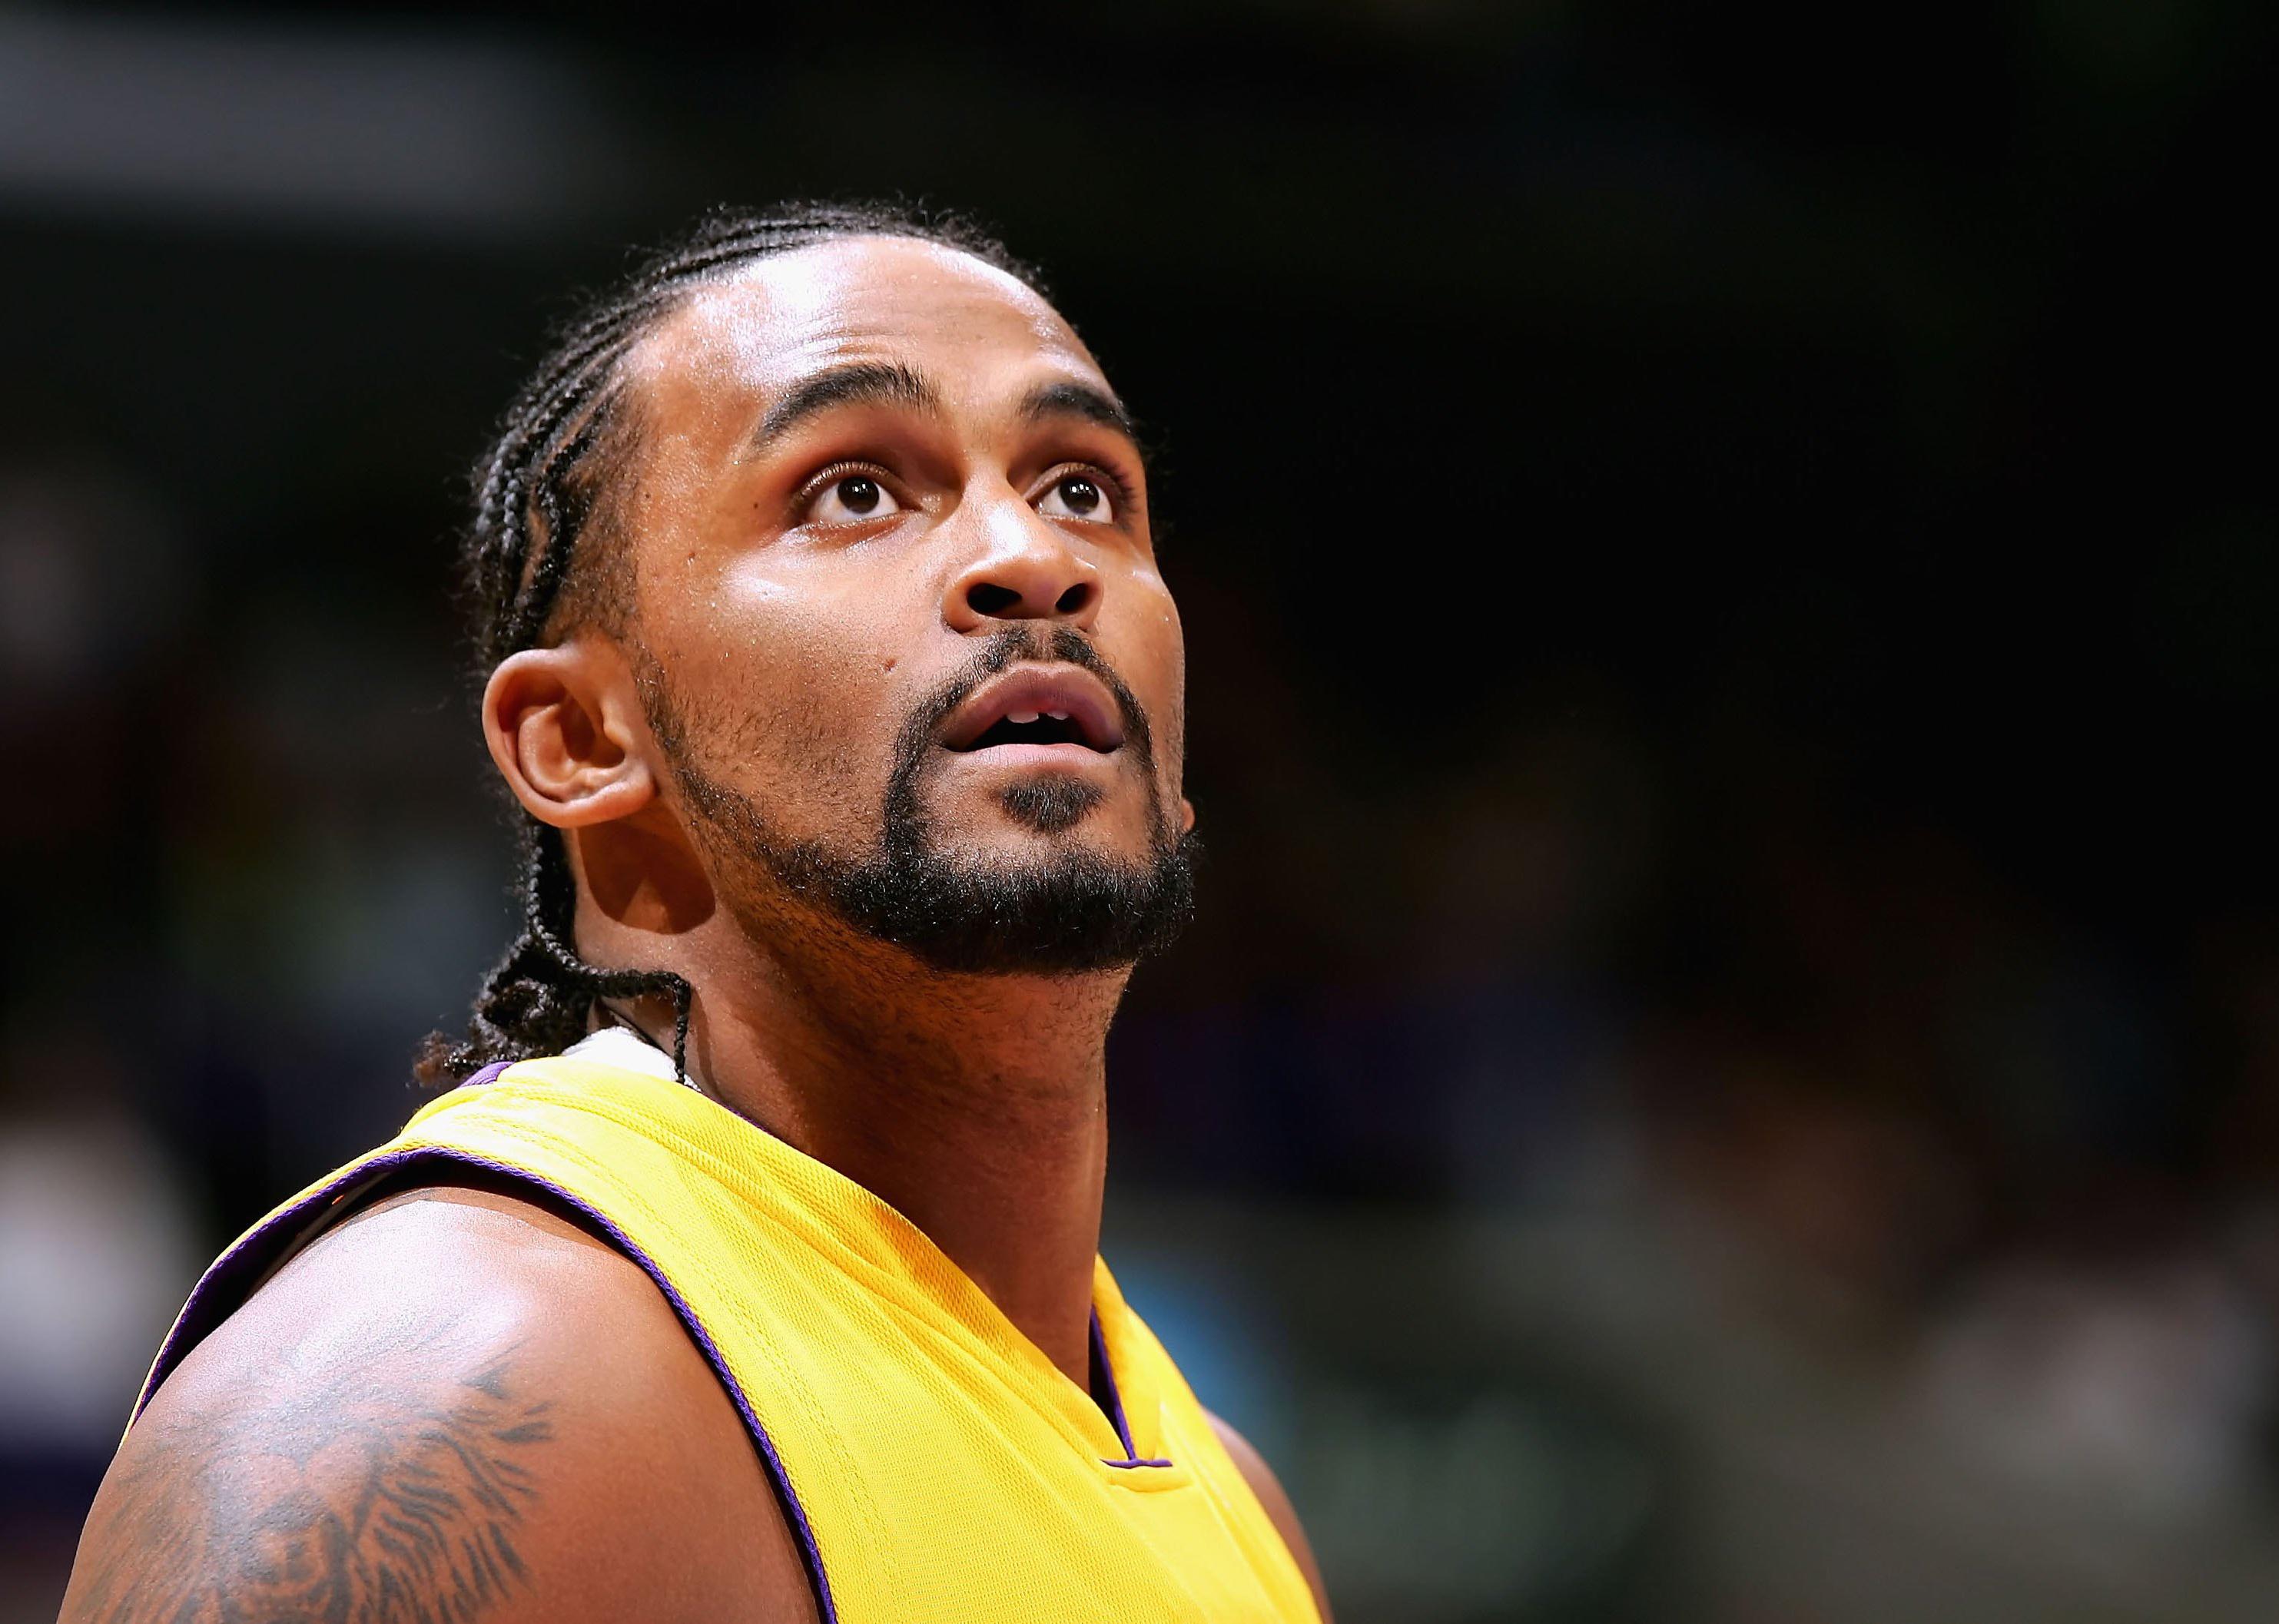 Ronny Turiaf during a game at Staples Center in Los Angeles.